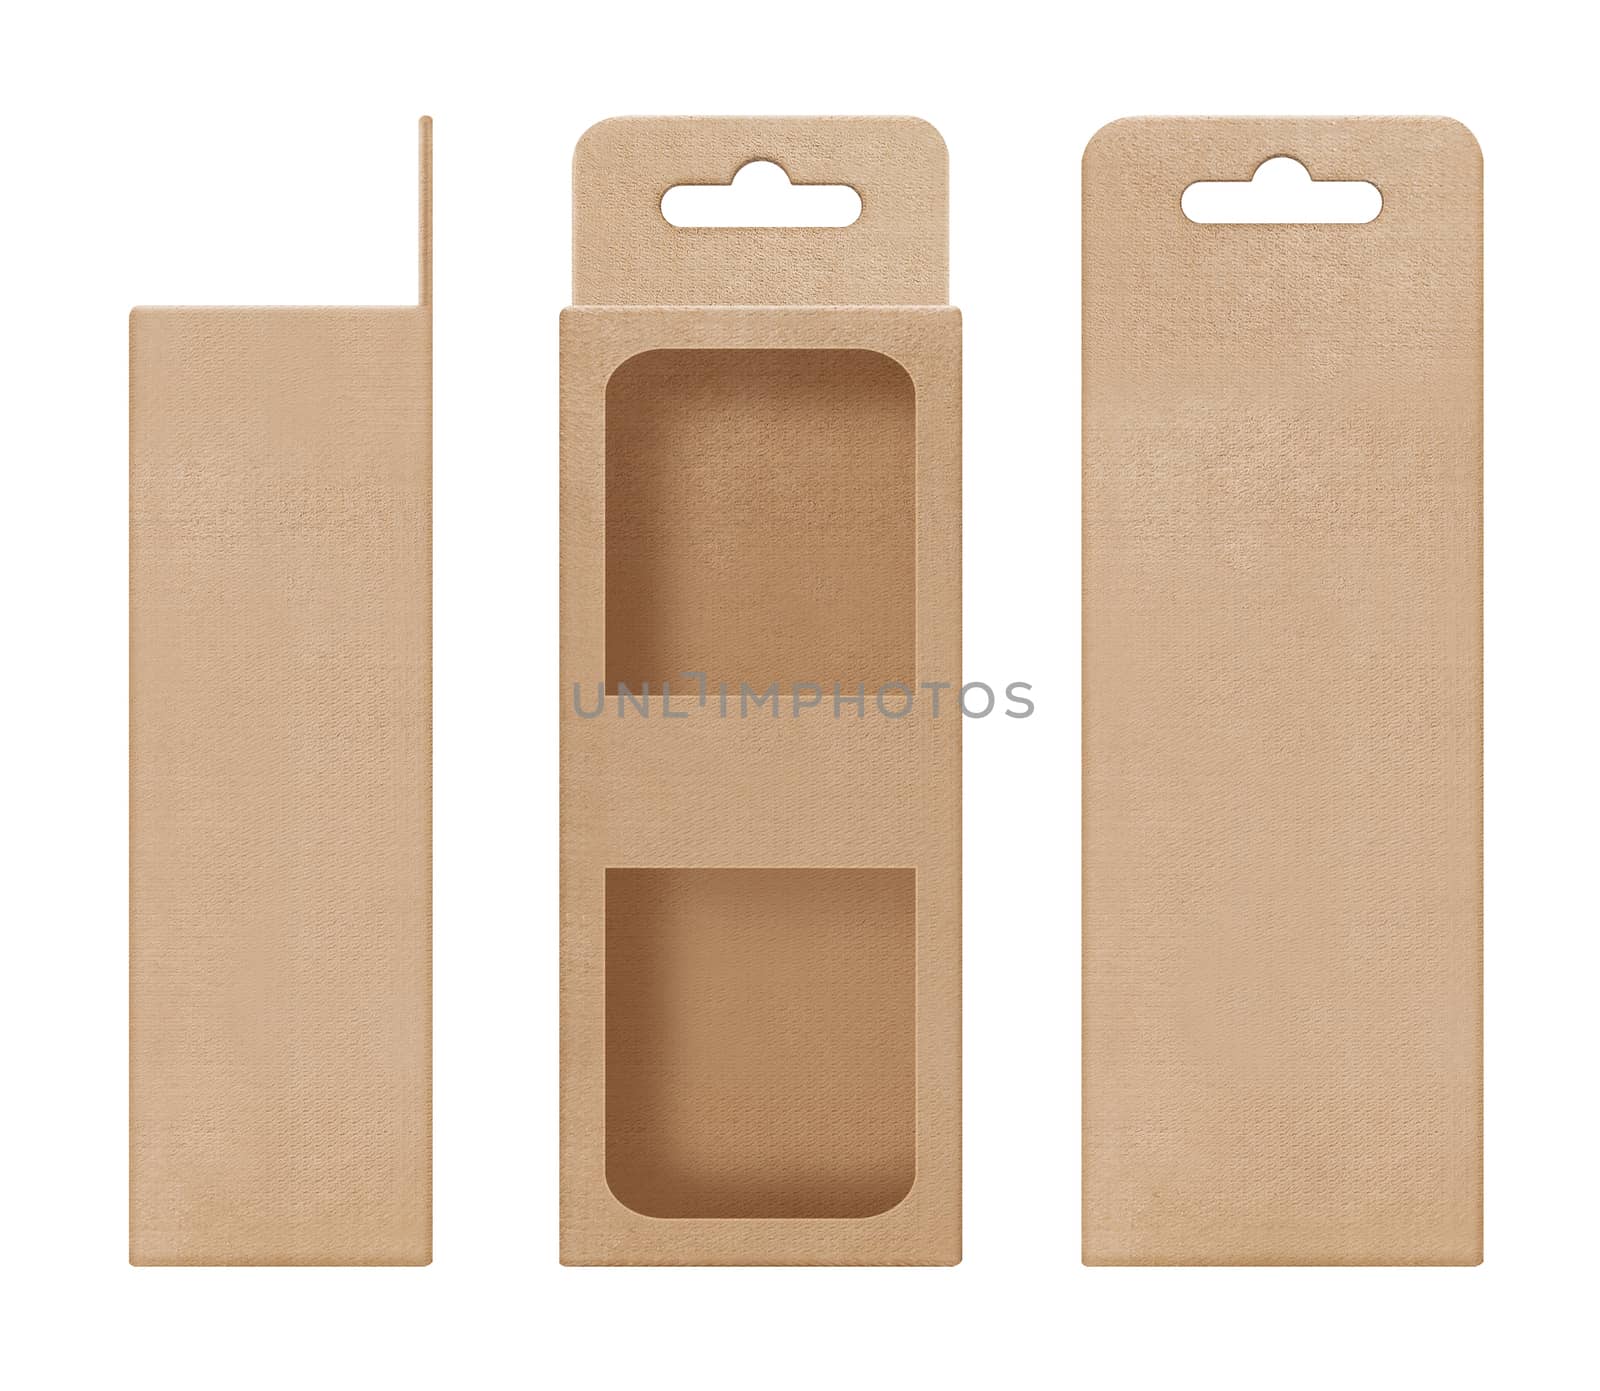 box, packaging, box brown for hanging cut out window shape open blank template for design product package by cgdeaw